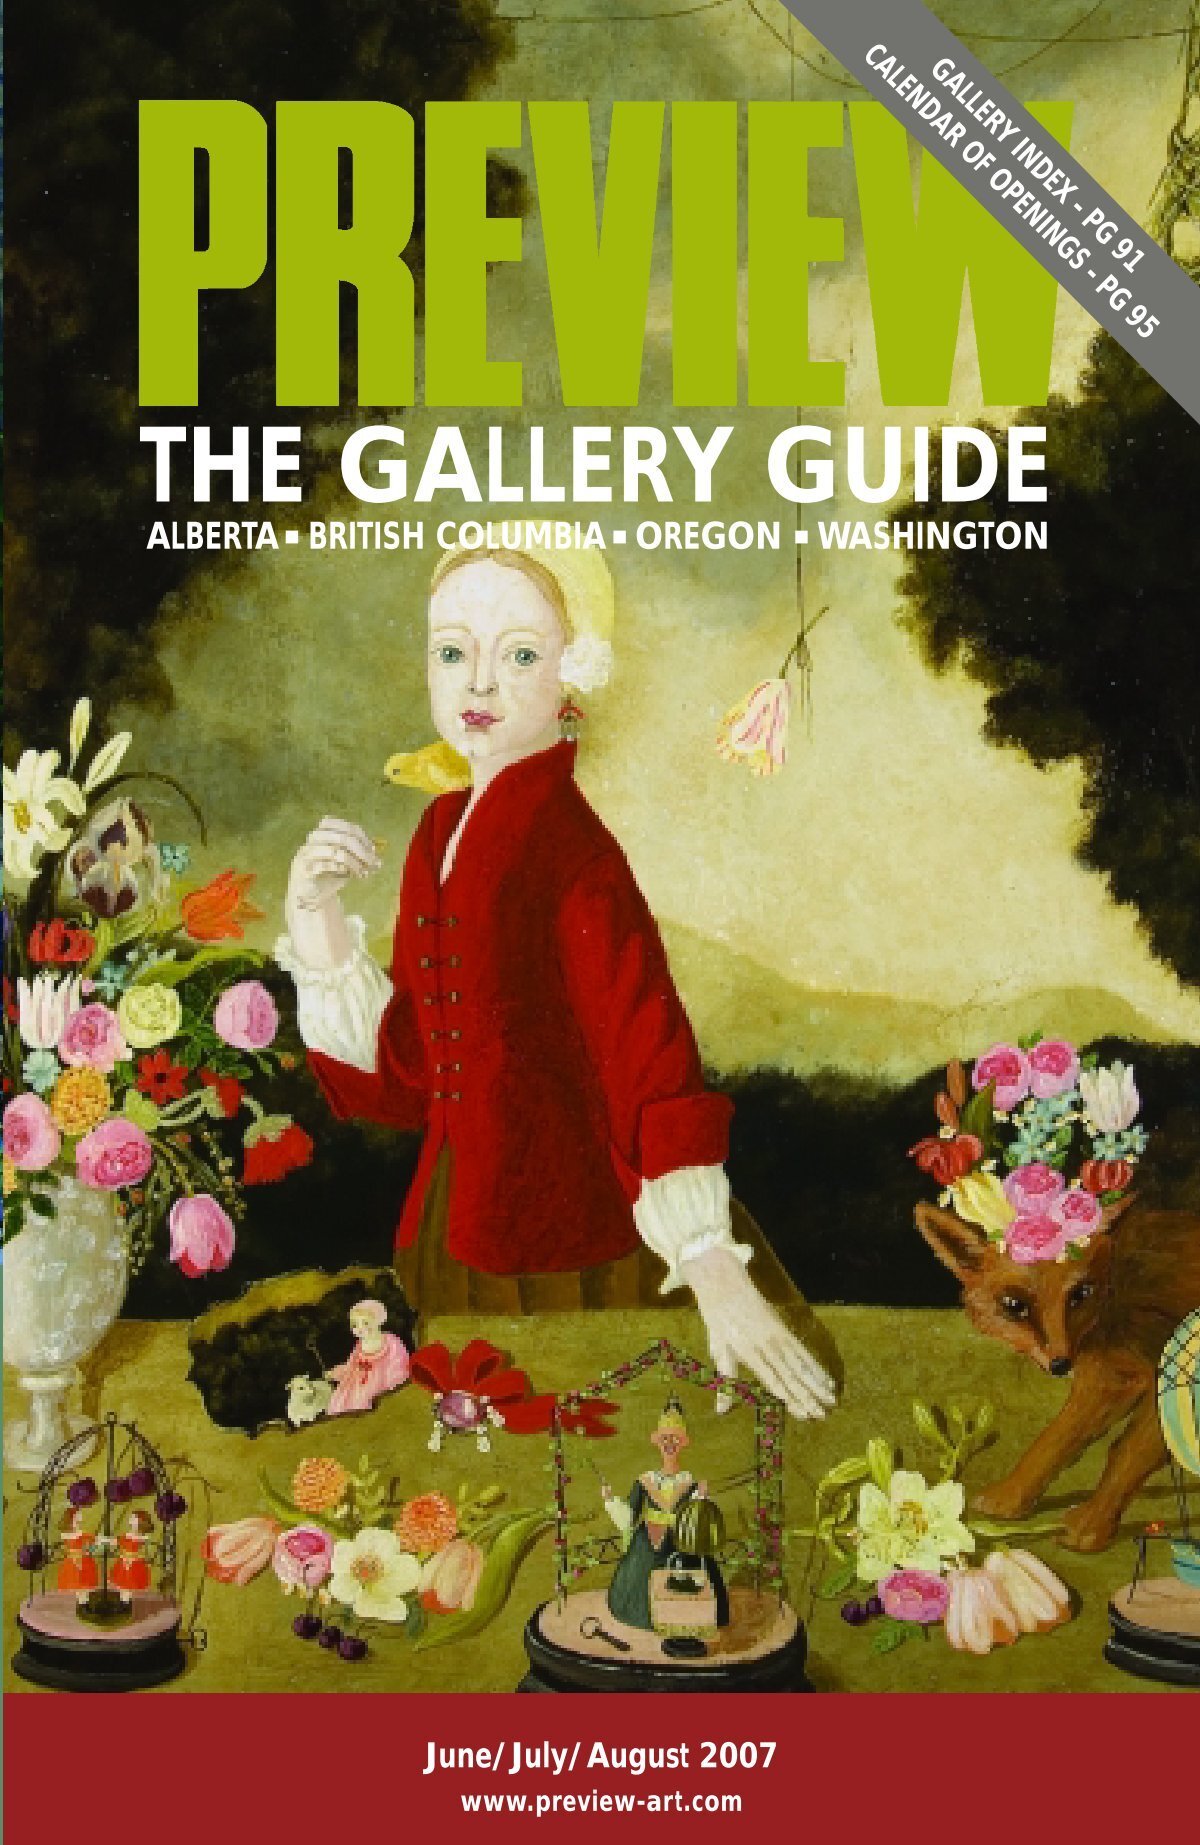 Preview, the Gallery Guide